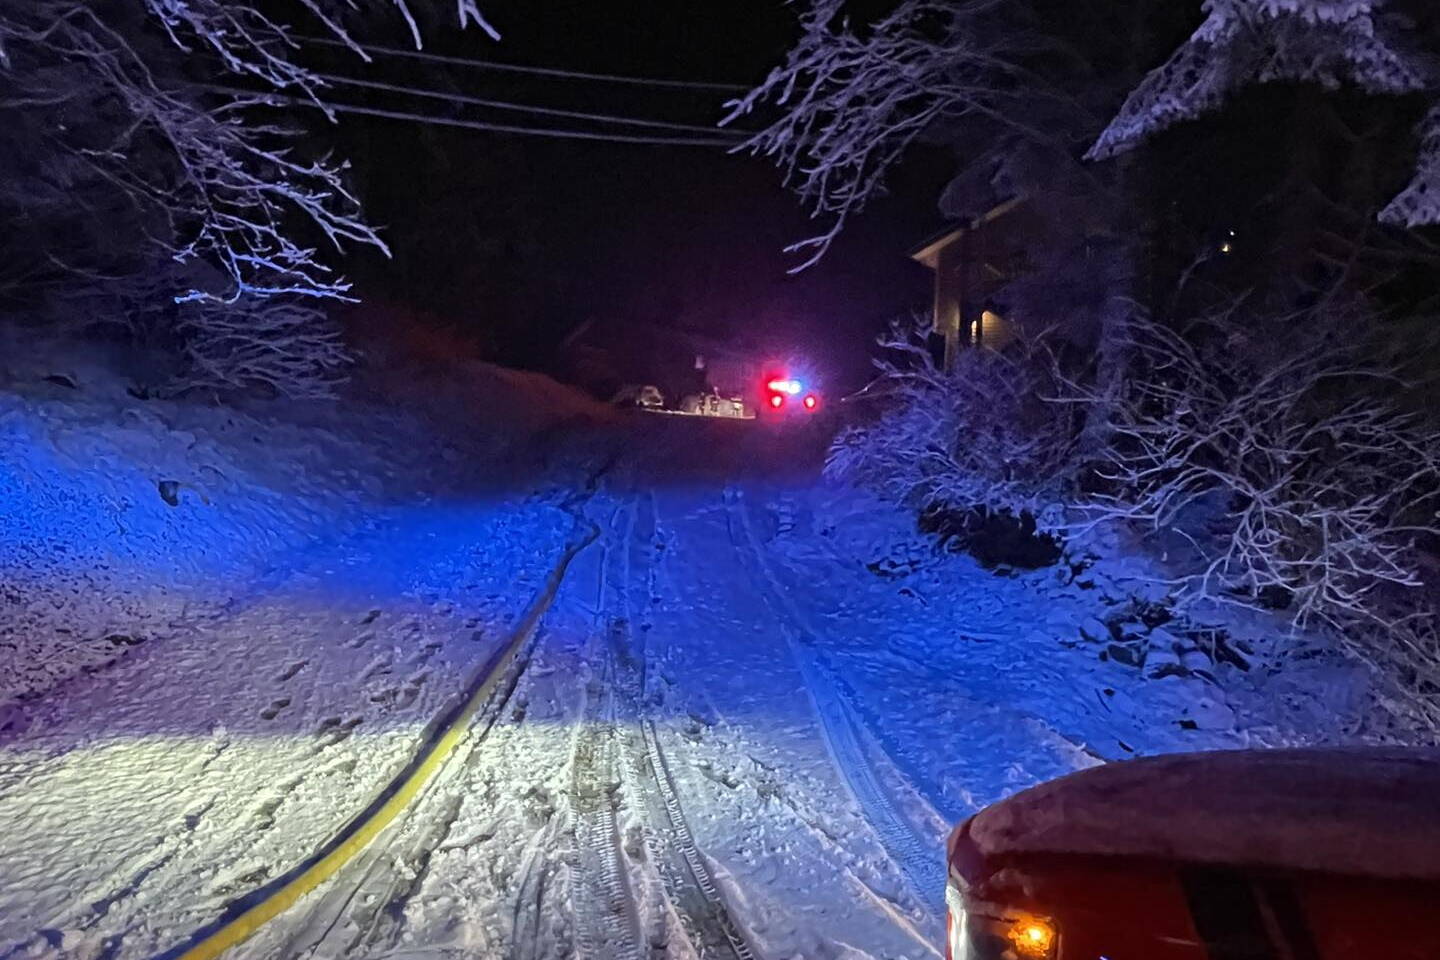 A fire hose lies along an uphill driveway to a residence in the 15000 block of Glacier Highway that caught fire early Thursday morning. Firefighters were forced to pull the hose about 100 yards up the driveway to the home because the fire truck was unable to access it due to slippery conditions. (Photo by Capital City Fire/Rescue)